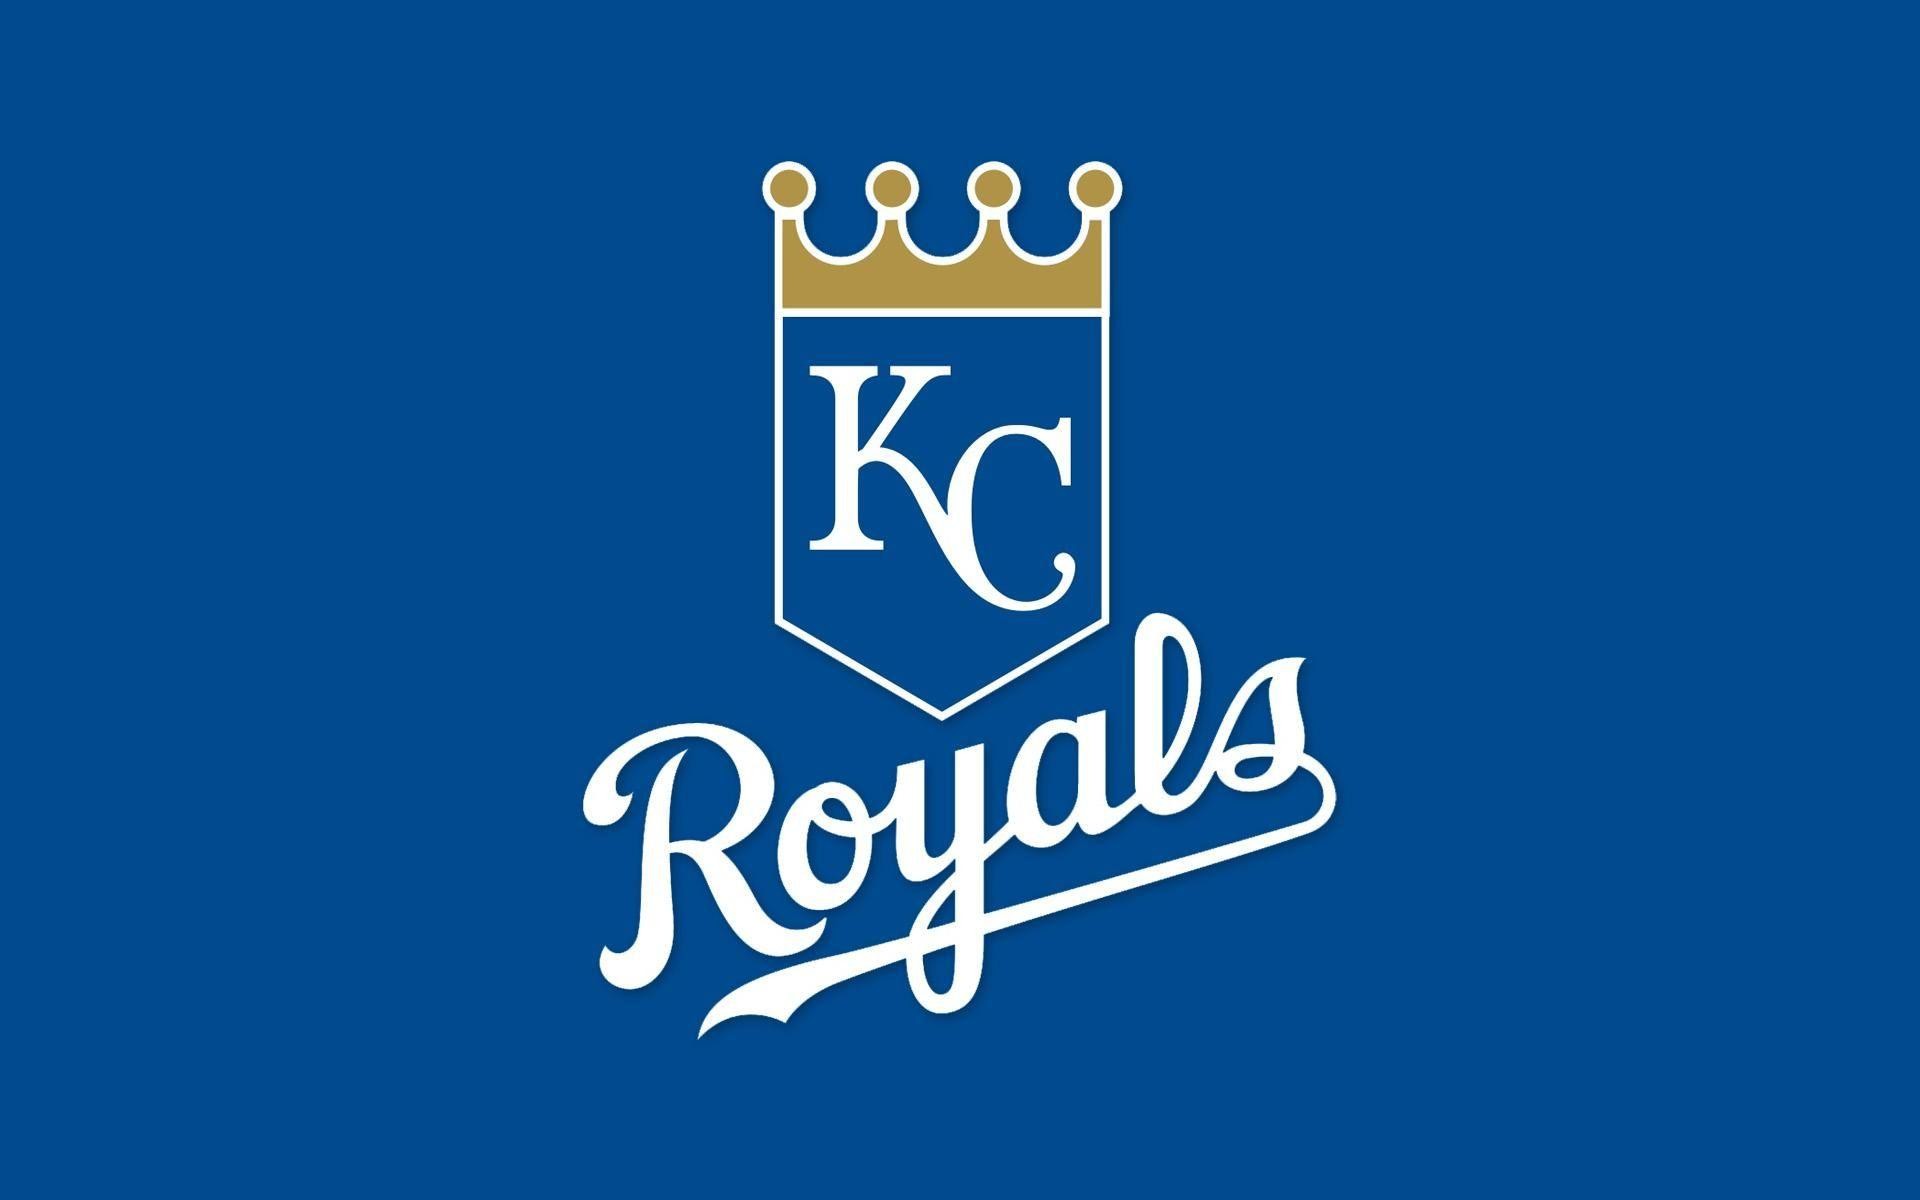 1920x1200 Kansas City Royals Wallpapers & Browser Themes to Get Pumped for .